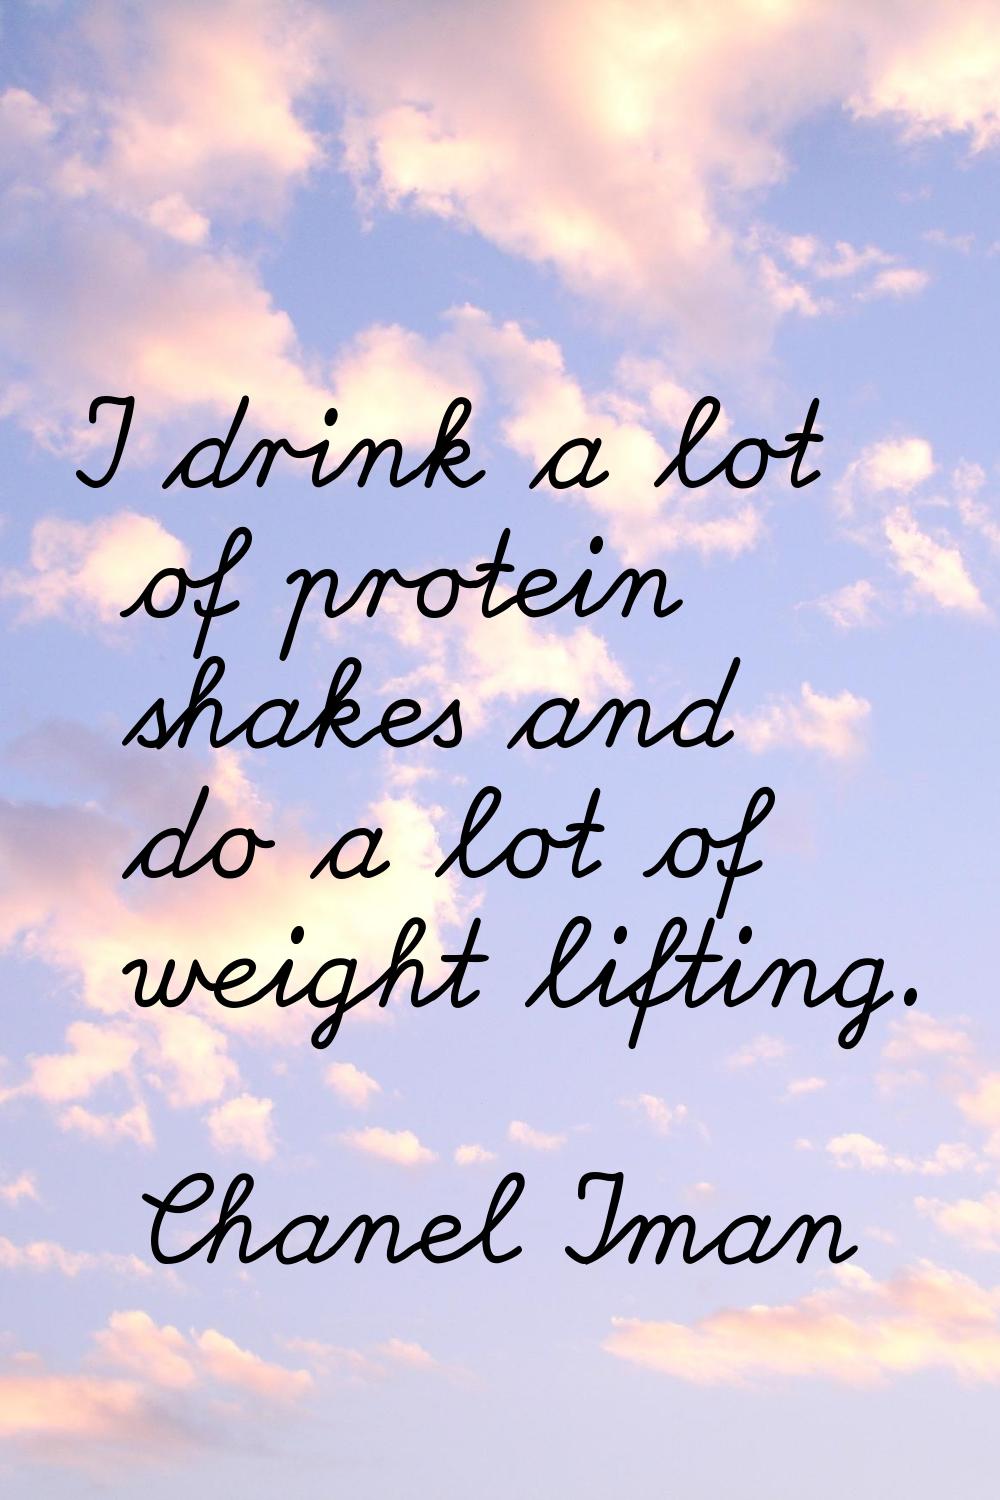 I drink a lot of protein shakes and do a lot of weight lifting.